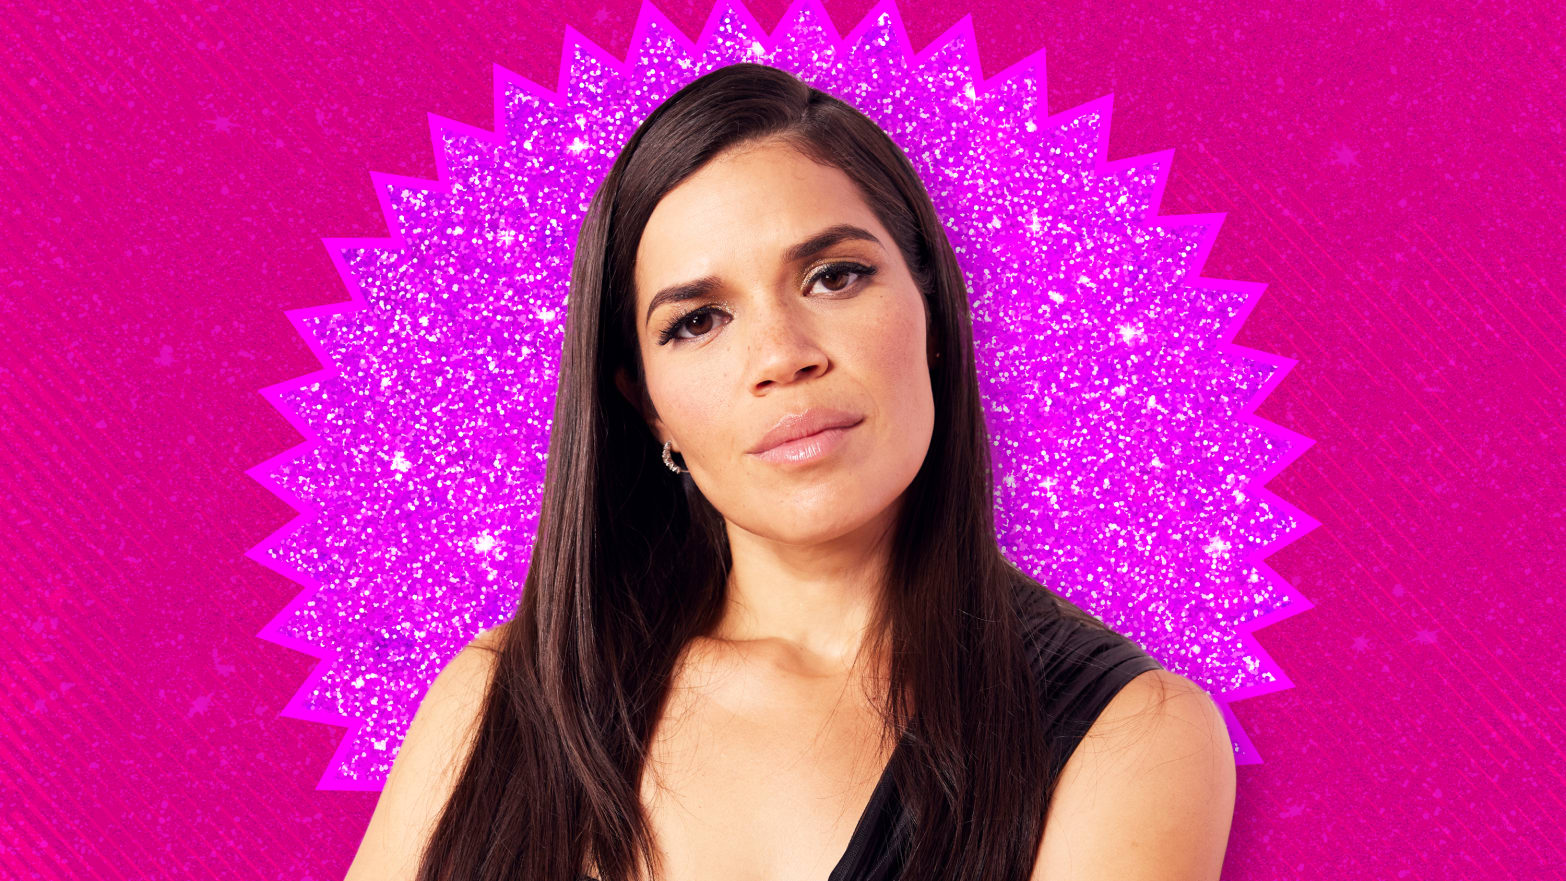 A photo illustration of America Ferrera on pink and purple background.